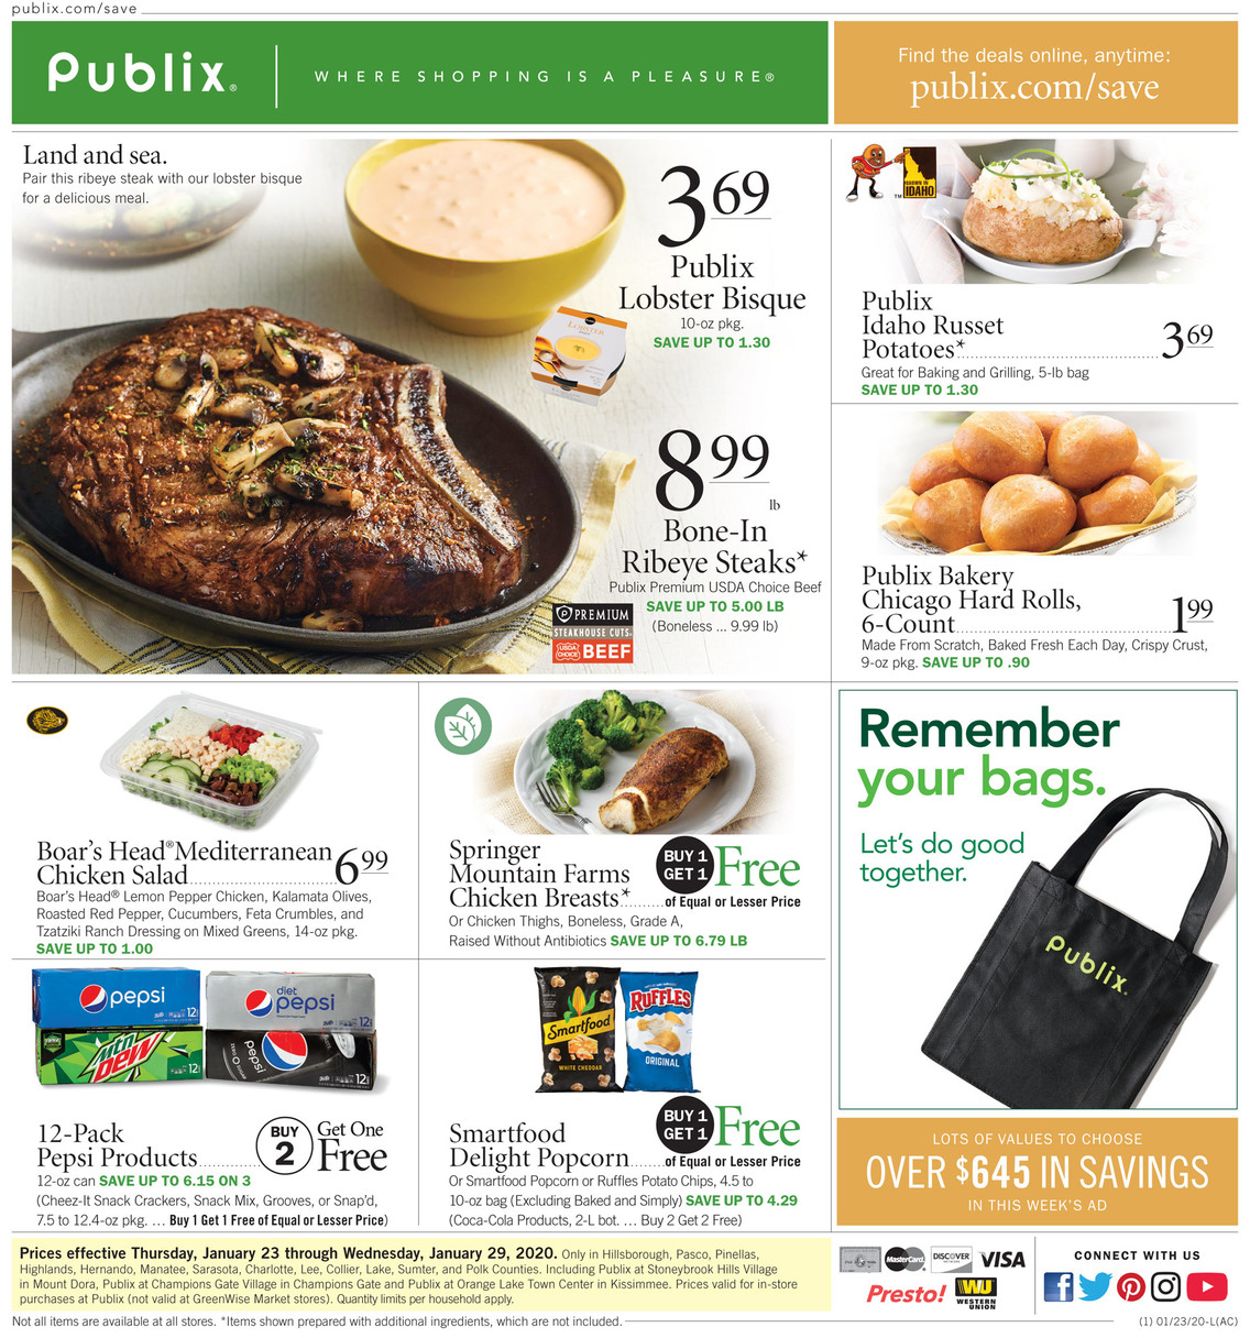 Publix Current weekly ad 01/23 - 01/29/2020 - frequent-ads.com